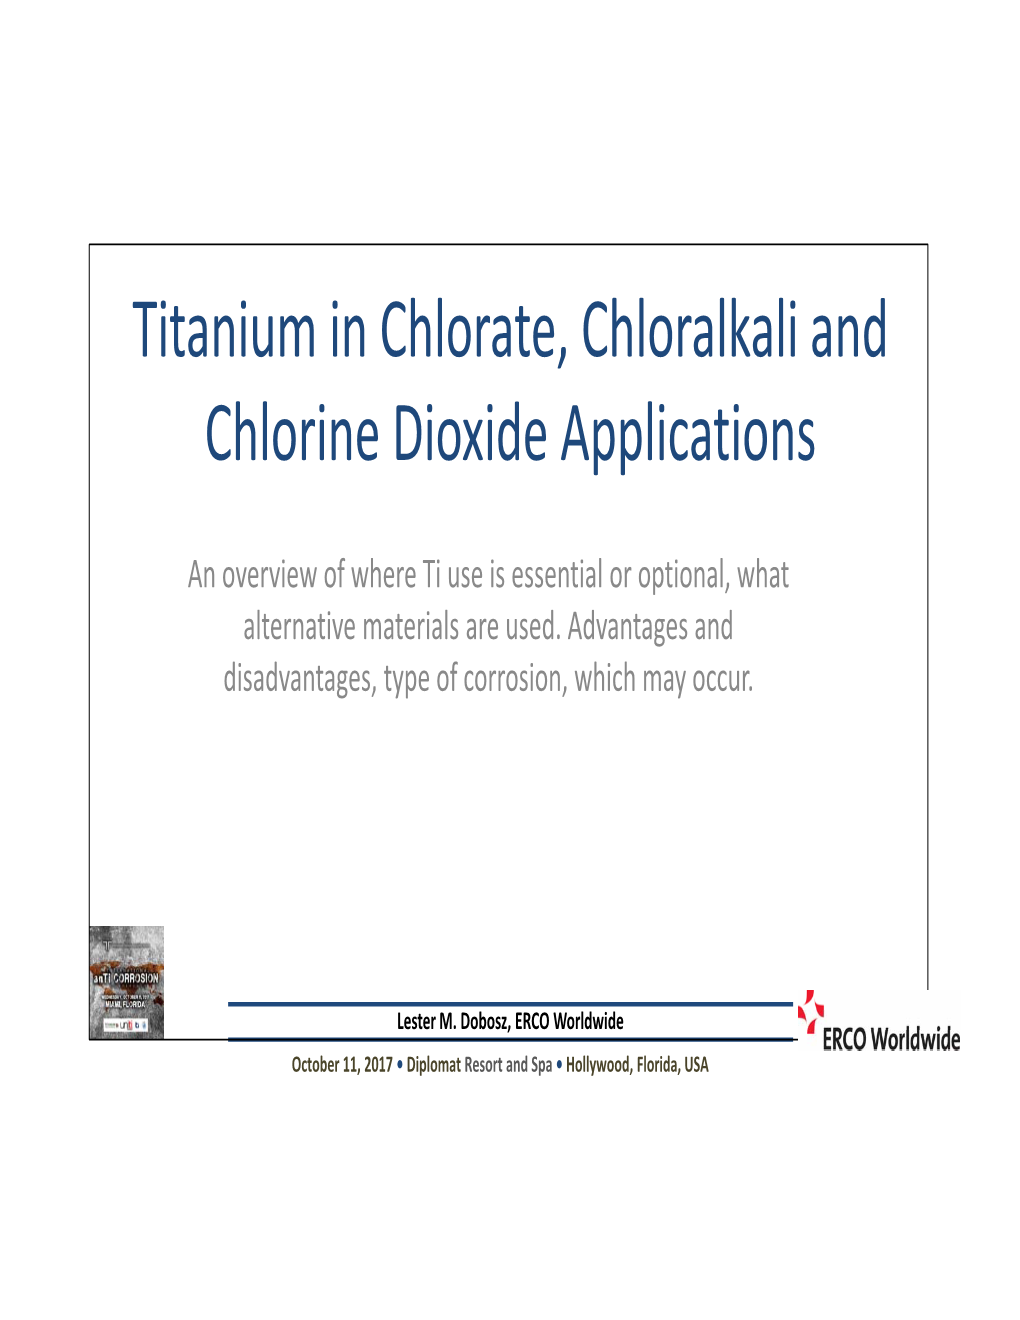 Titanium in Chlorate, Chloralkali and Chlorine Dioxide Applications